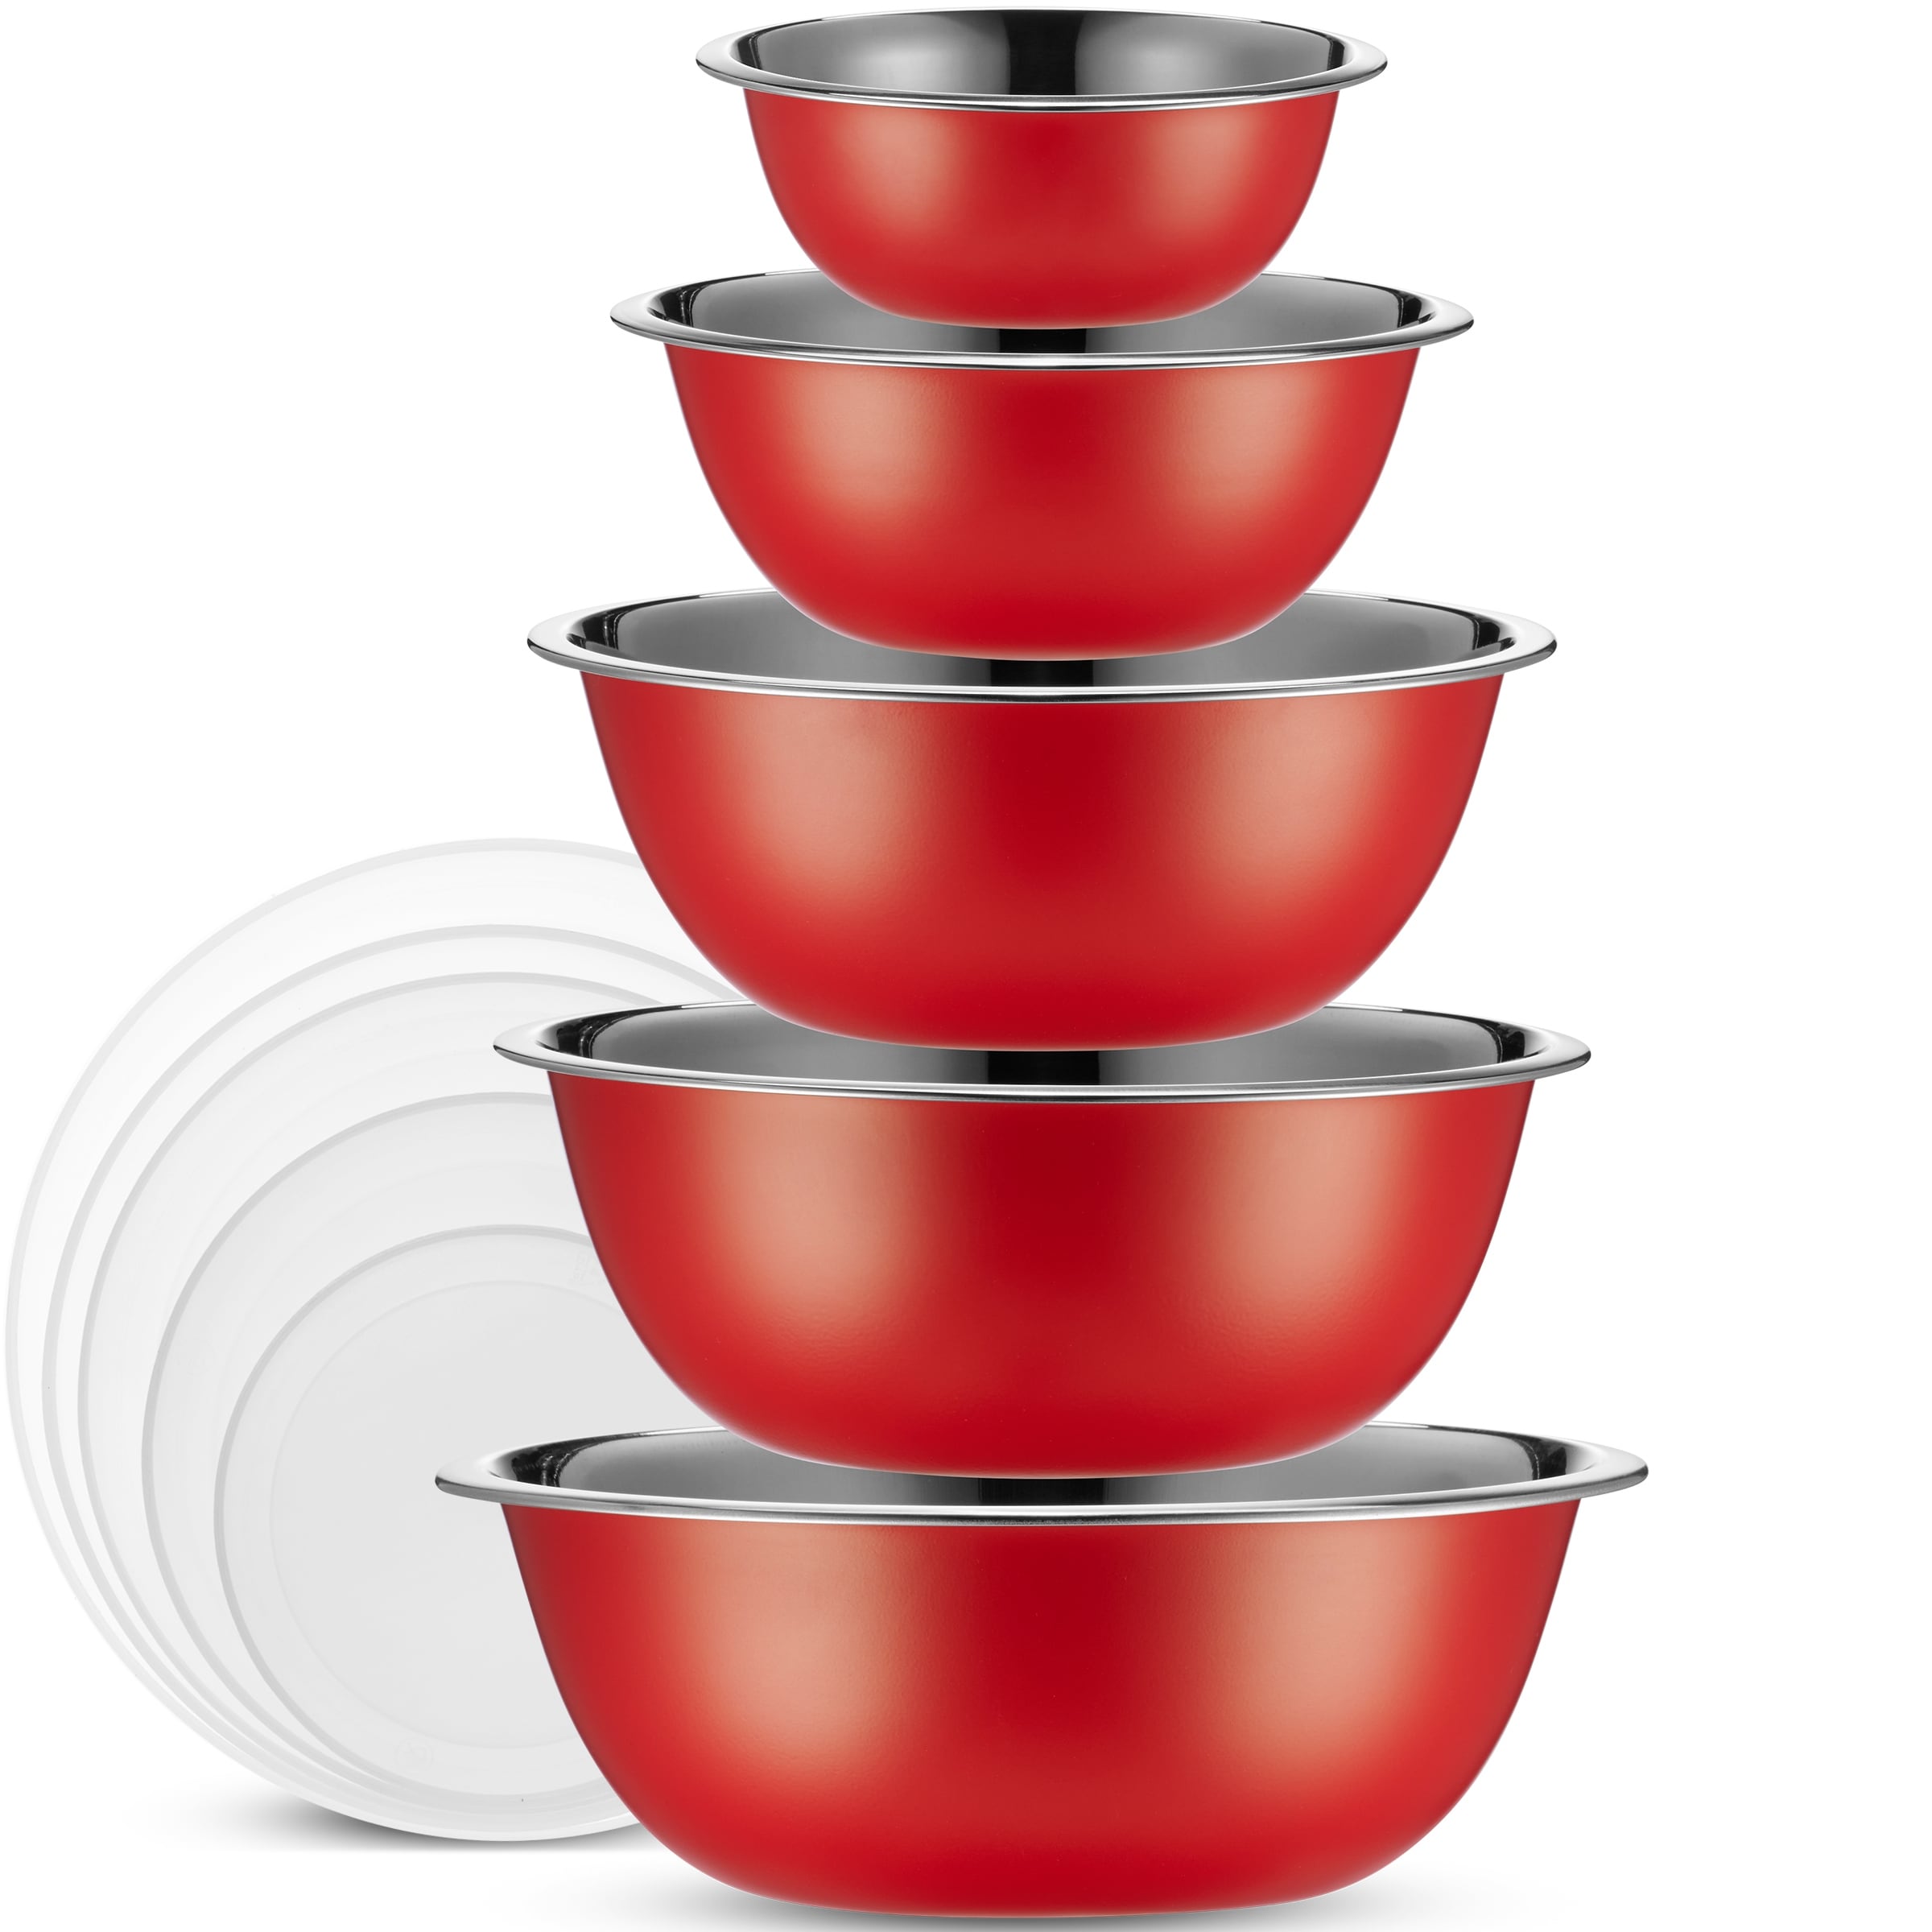 https://ak1.ostkcdn.com/images/products/is/images/direct/8710985fec6c5f67dd1ebbc759854c0d14a80fcc/Heavy-Duty-Meal-Prep-Stainless-Steel-Mixing-Bowls-Set-with-Lids.jpg